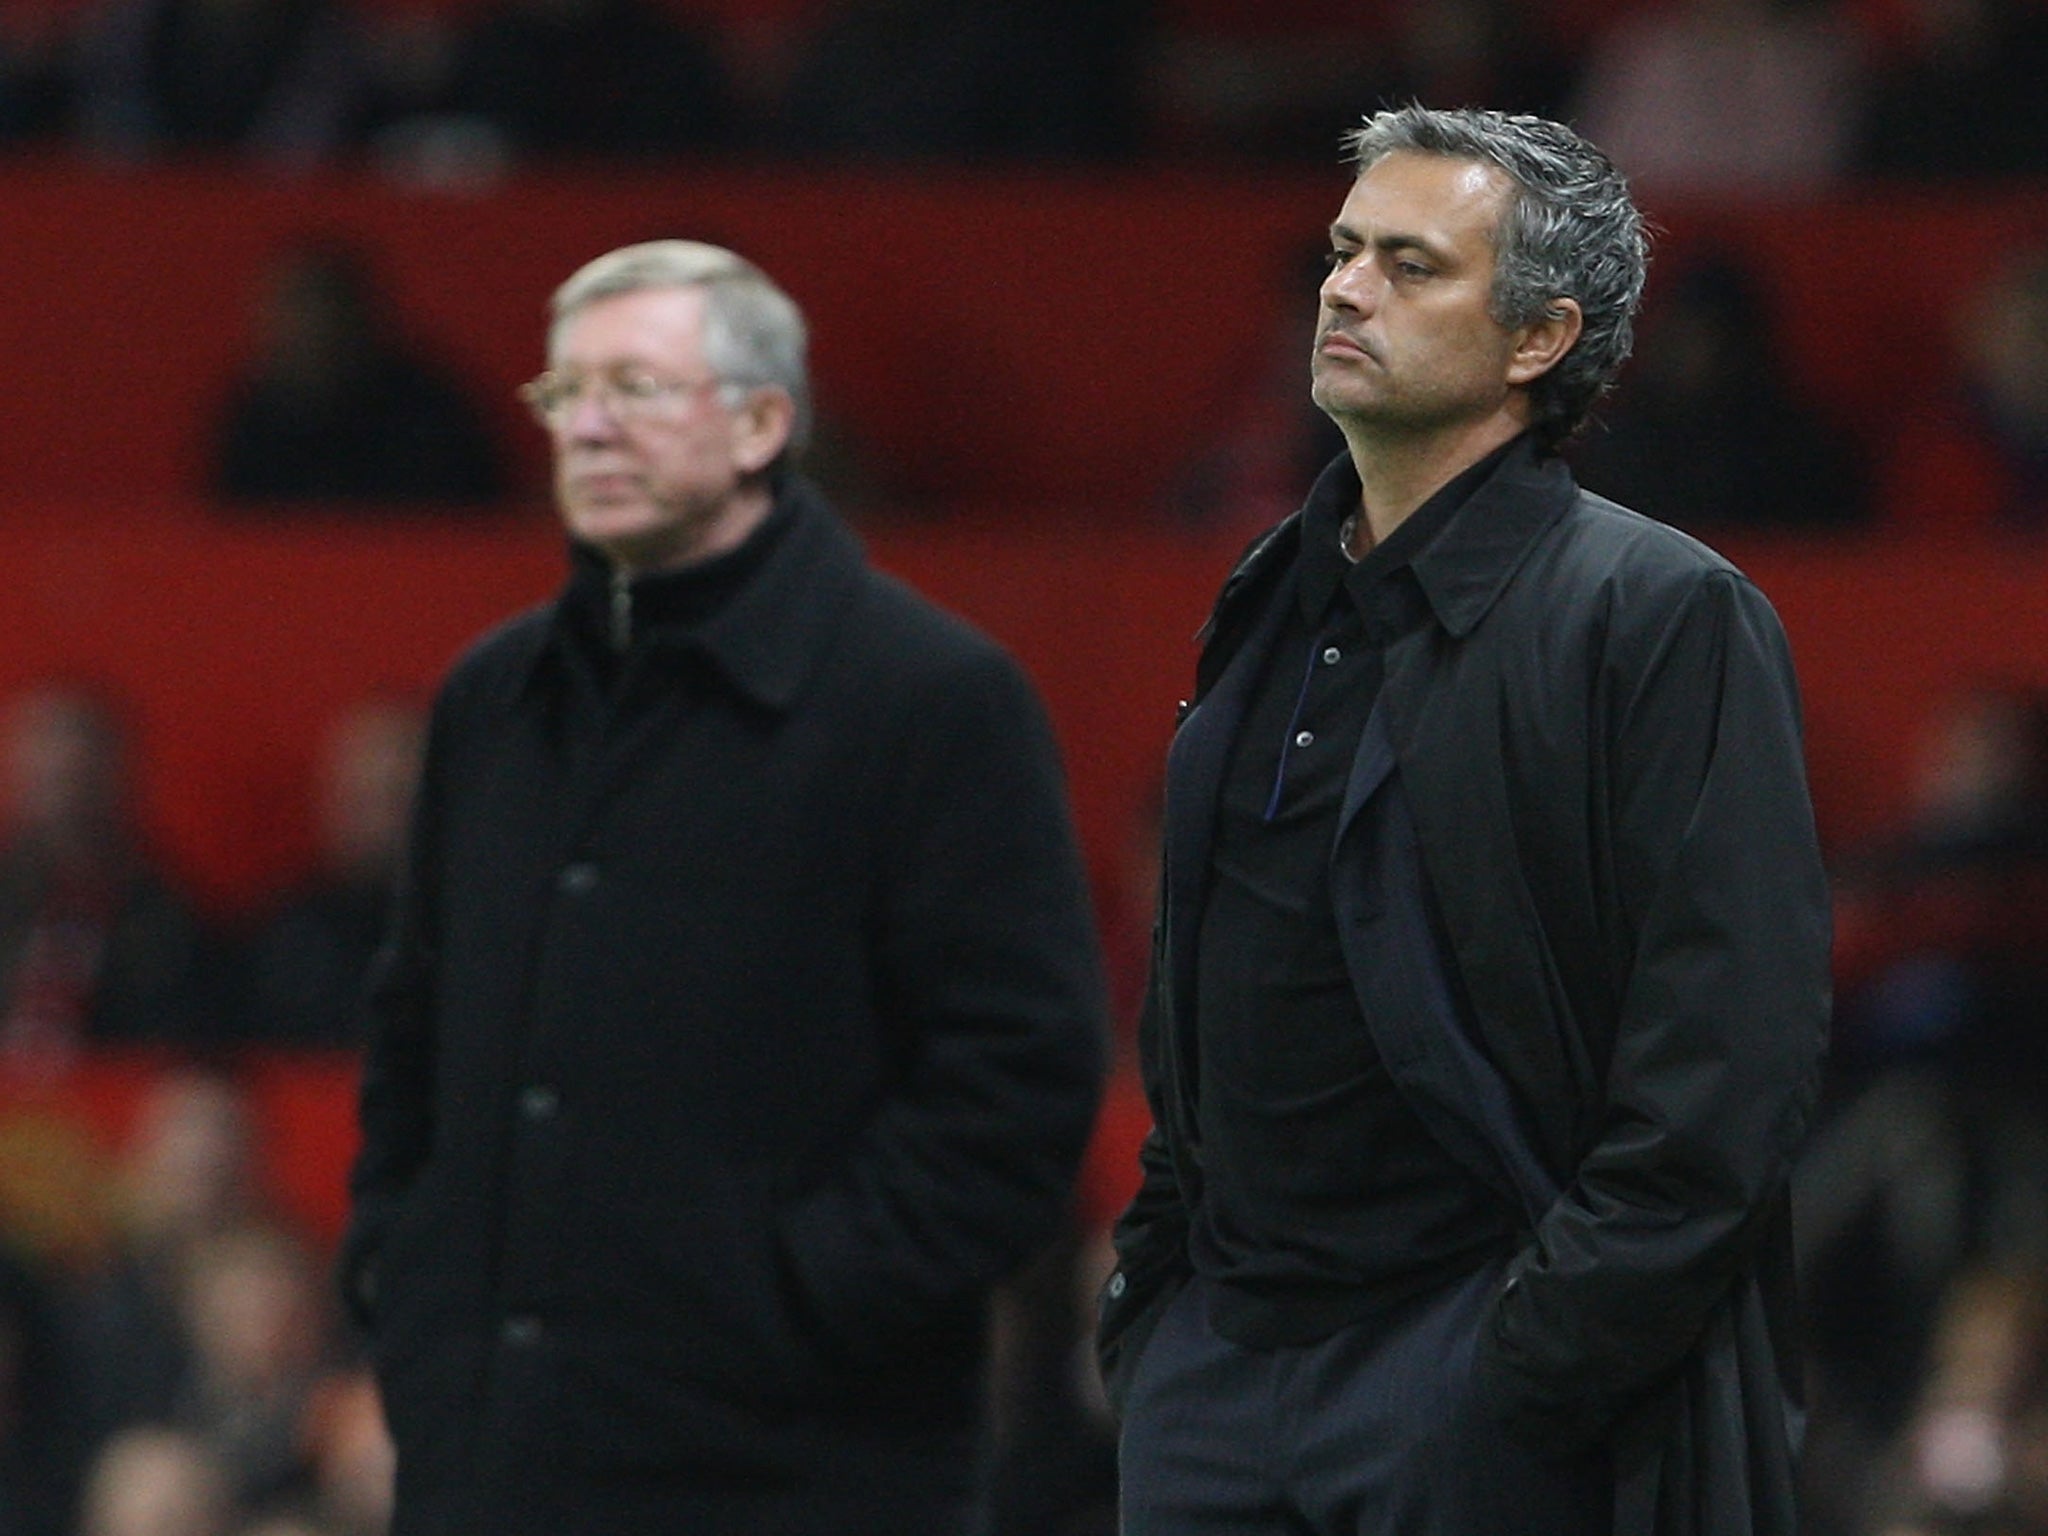 Ferguson and Mourinho on the Old Trafford touchline in 2013